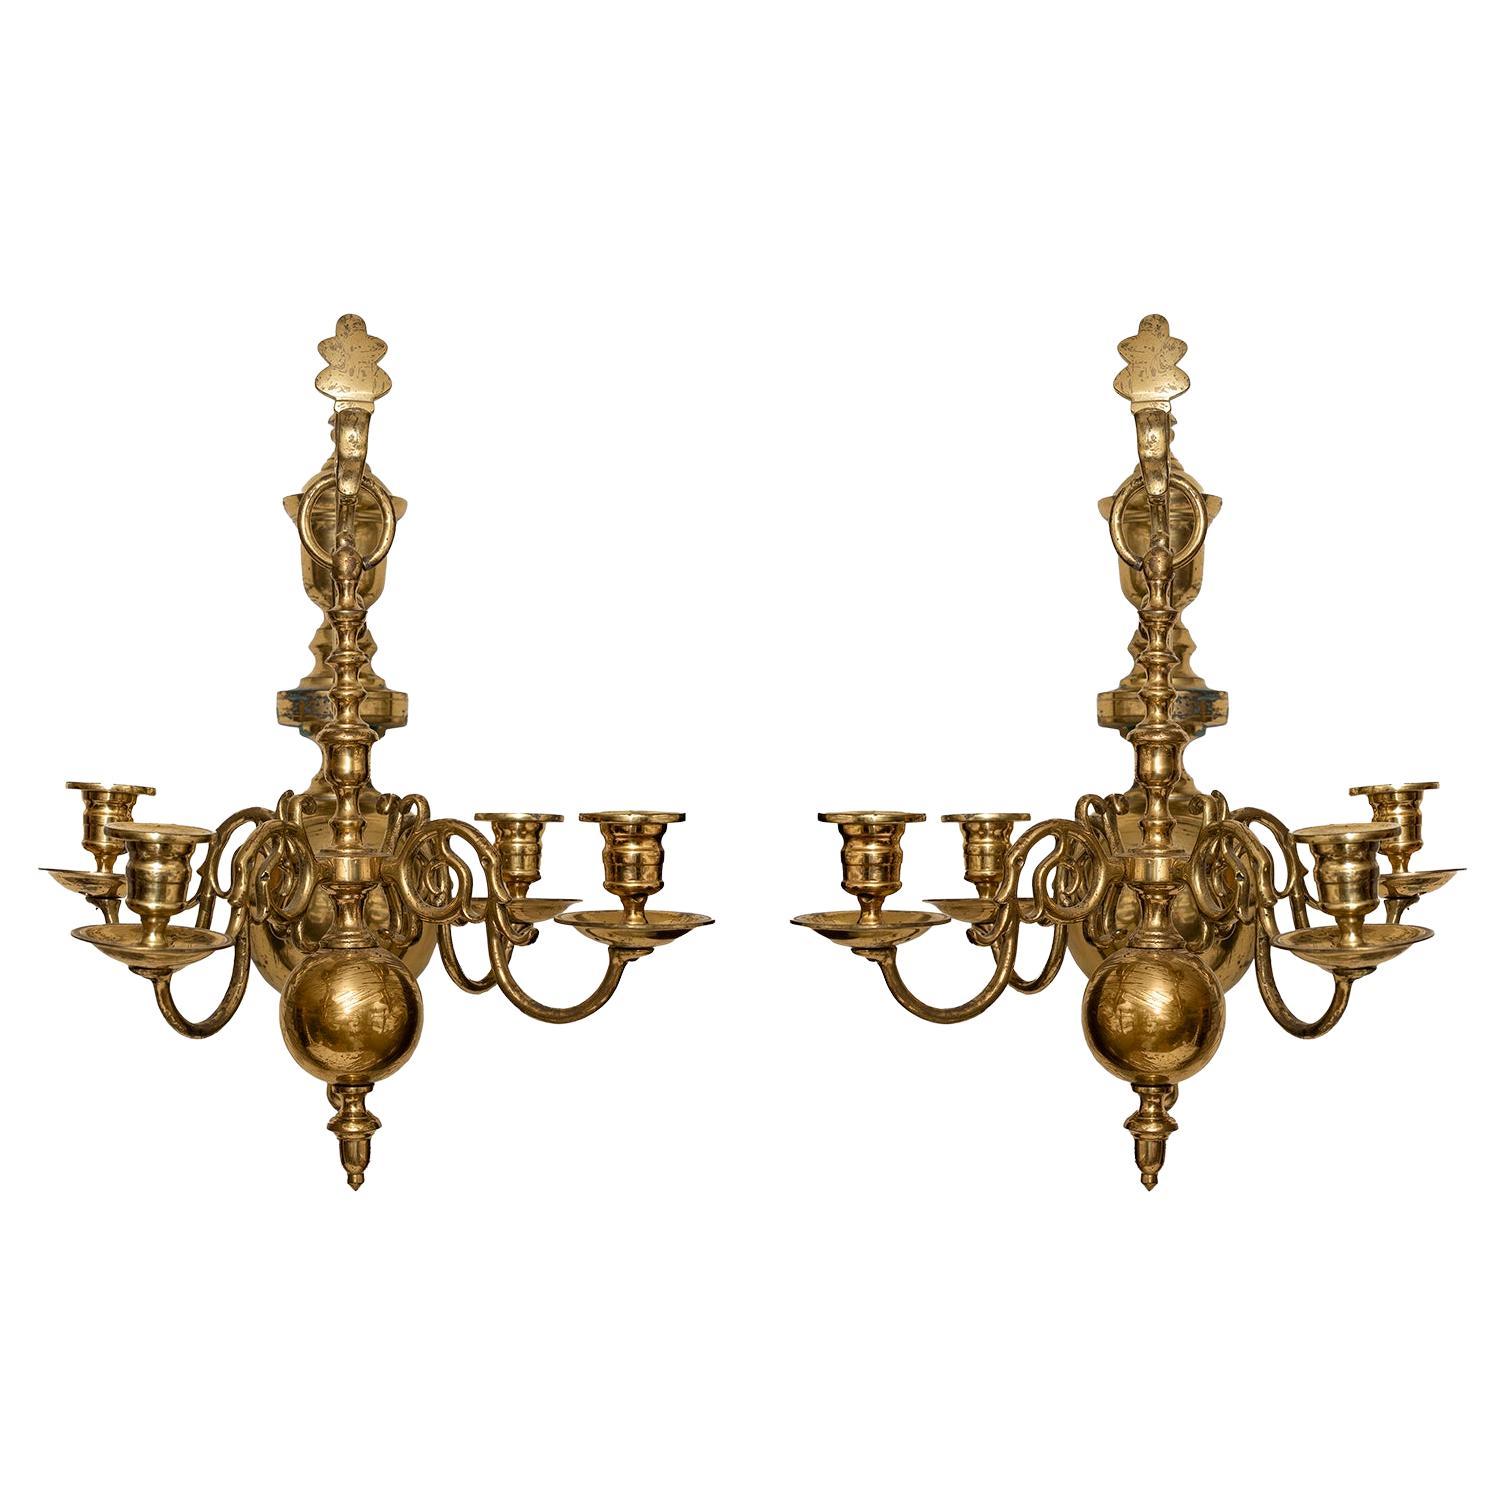 Wall Sconces Brass Pair 4-Arm Chandeliers